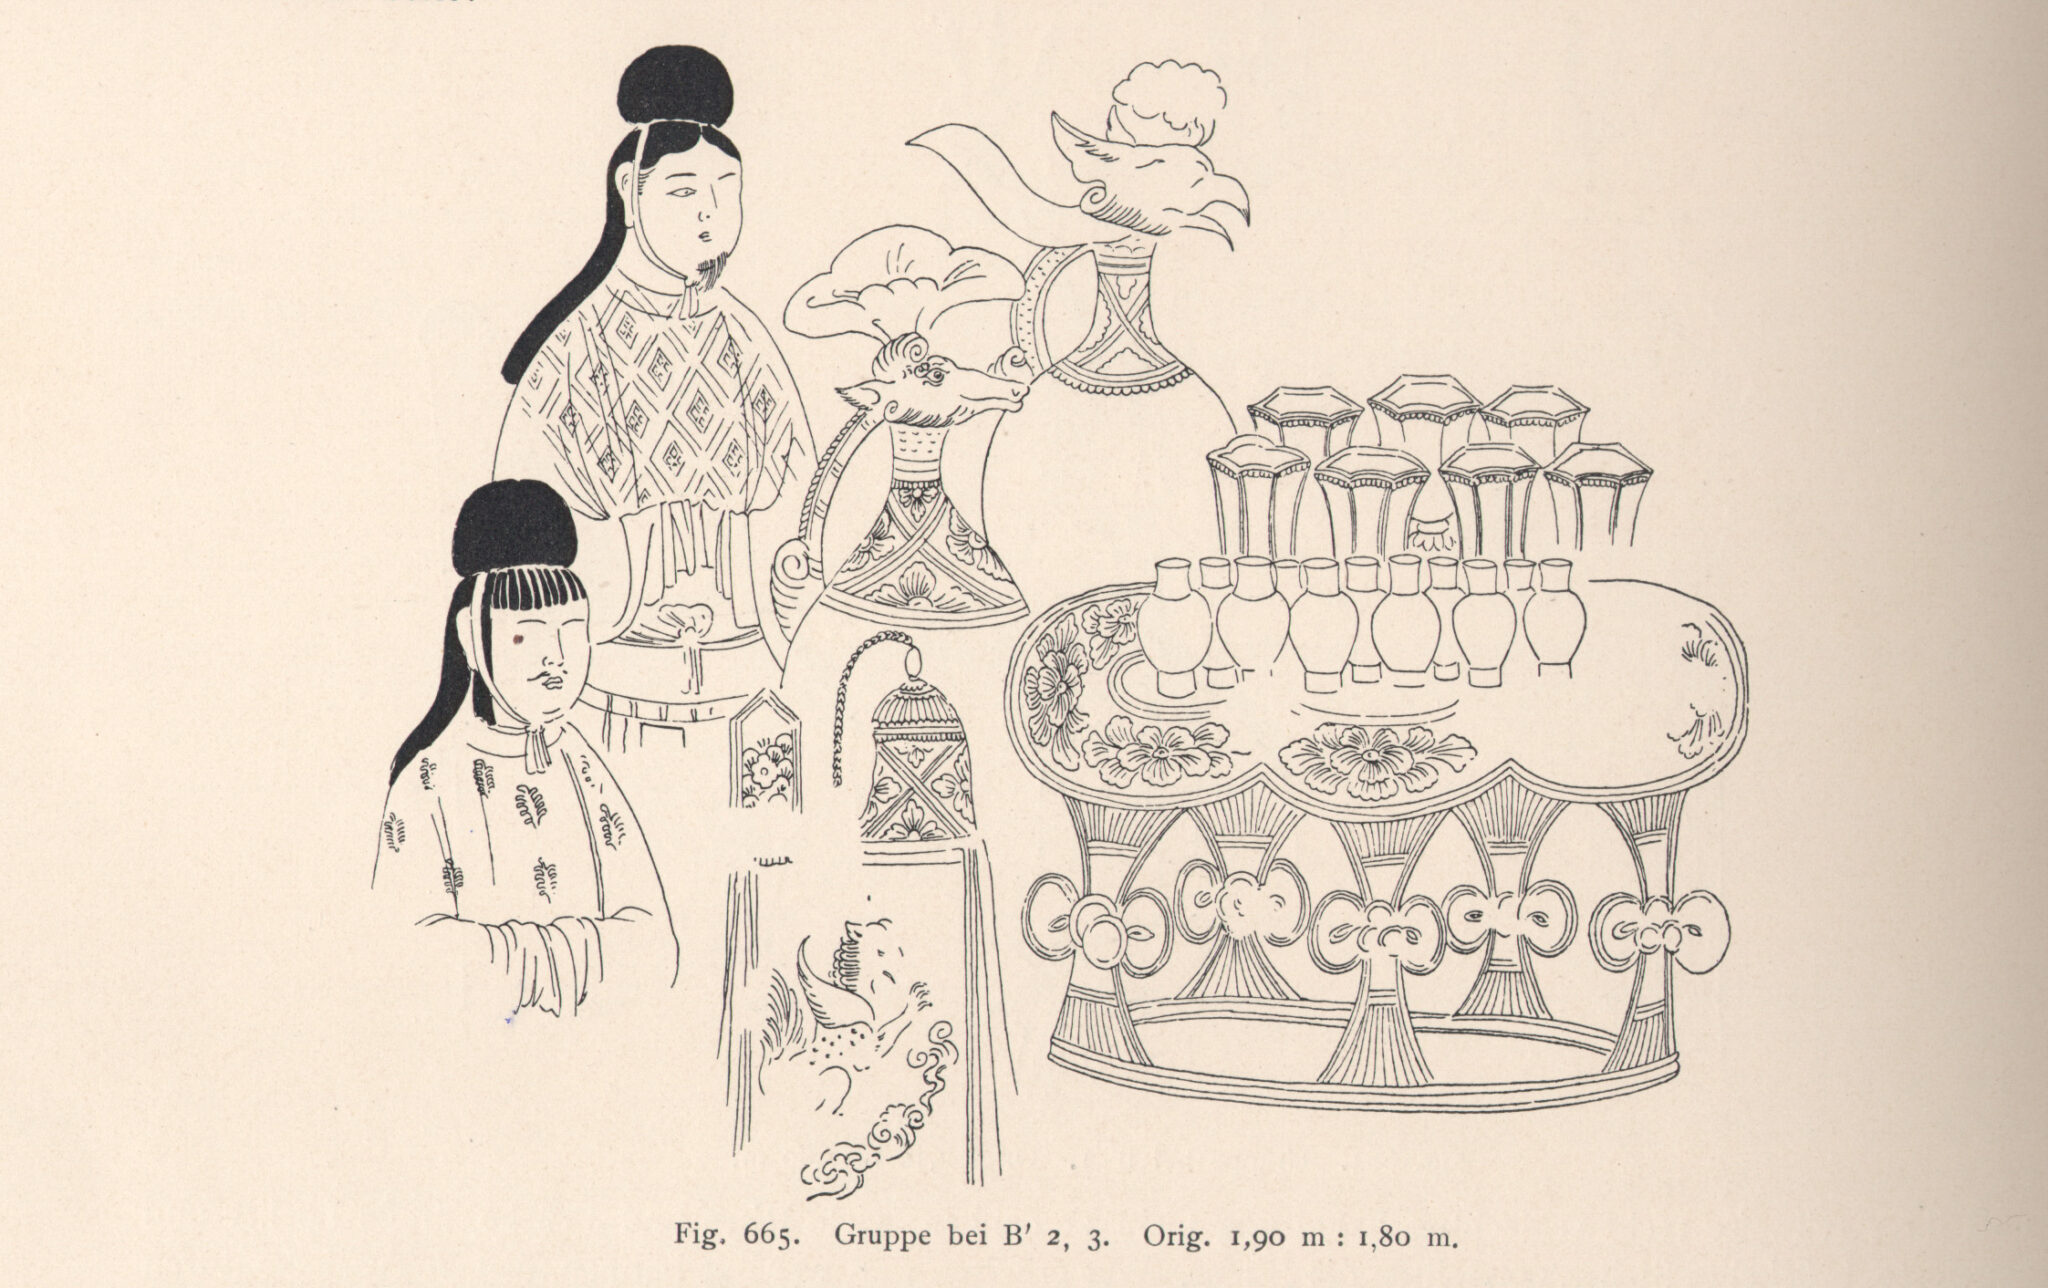 Line drawing featuring two robed figures, two ewers with animal head spouts, and table set with small vessels; German text at bottom